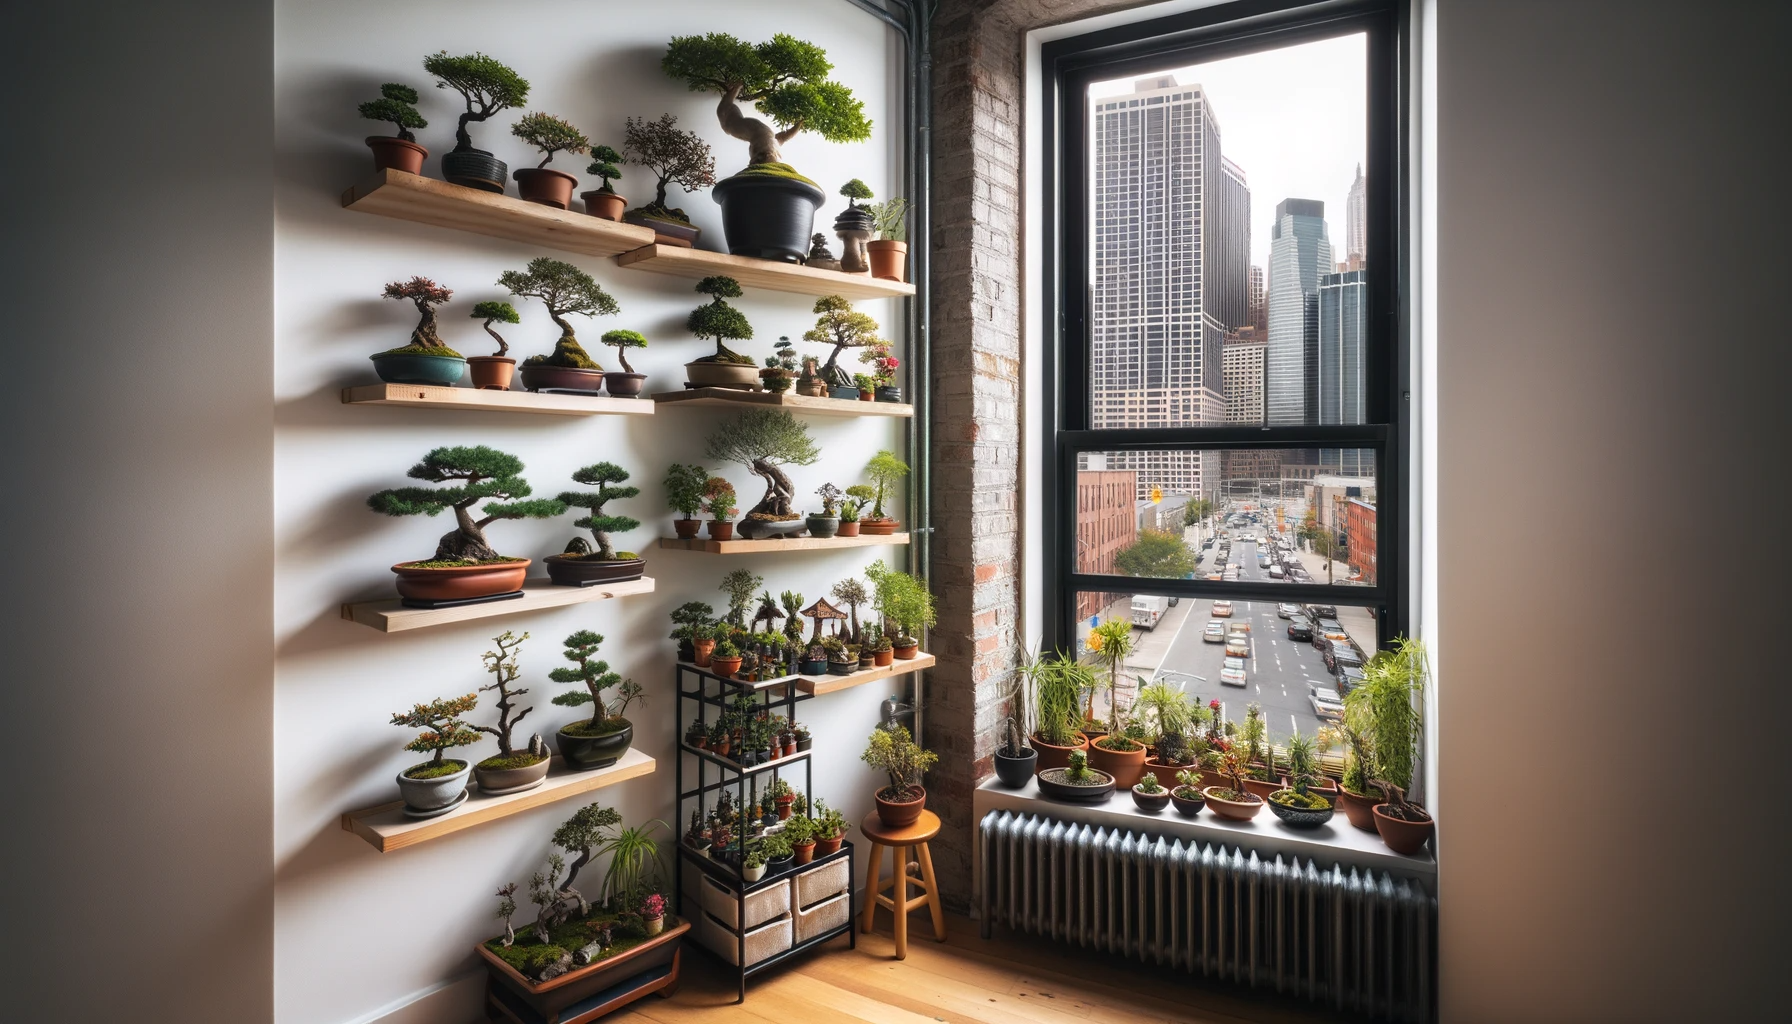 Urban Bonsai: Growing Miniature Trees in Small Spaces